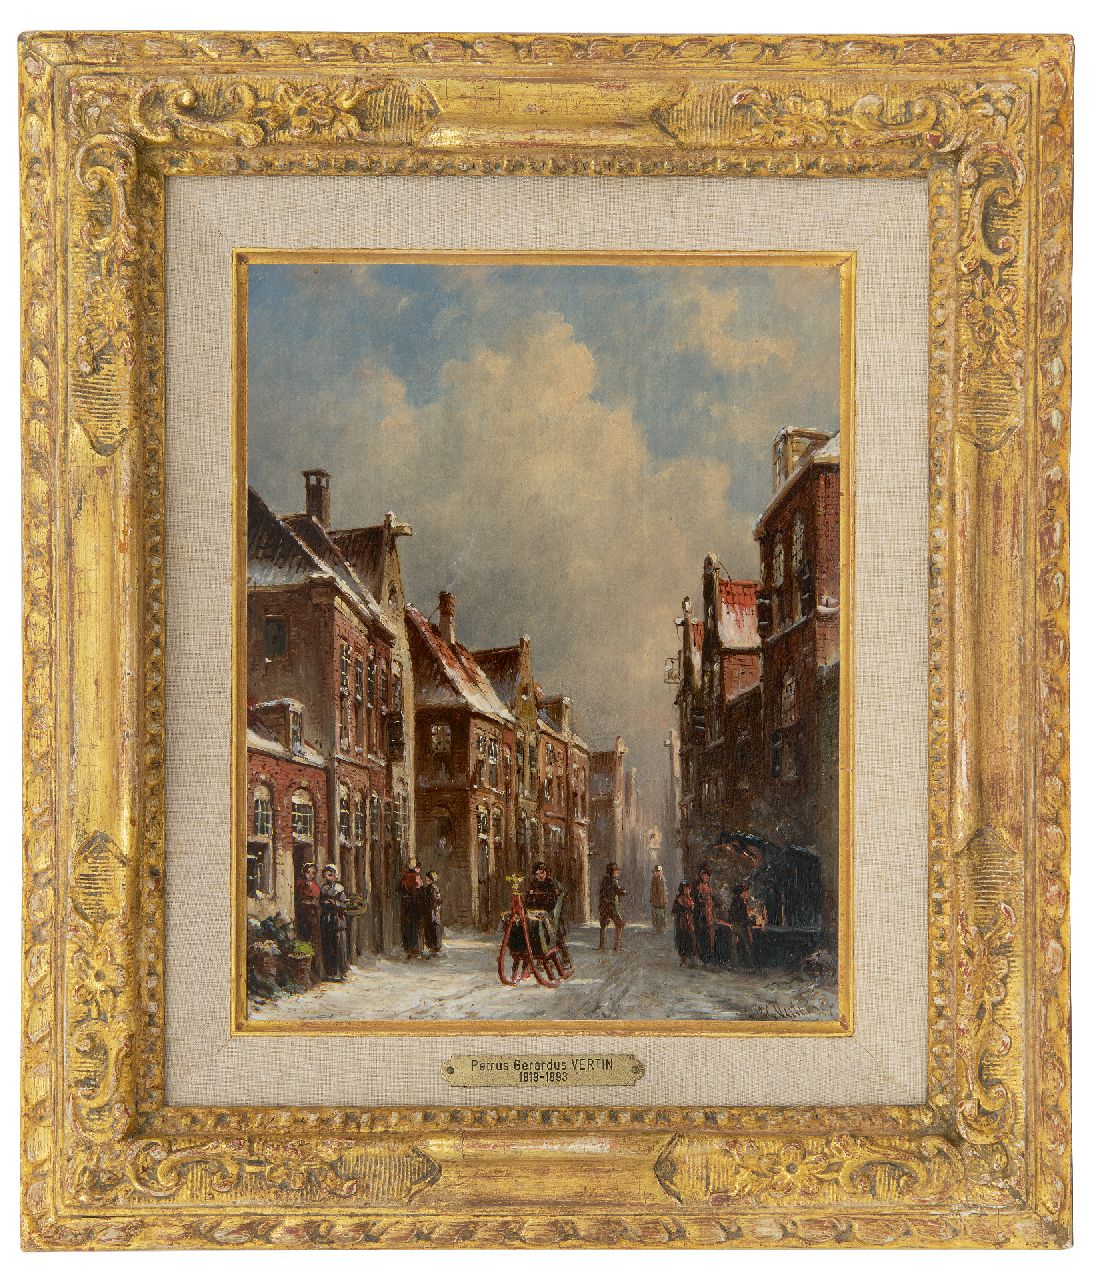 Vertin P.G.  | Petrus Gerardus Vertin, Village street in winter, oil on panel 24.1 x 19.0 cm, signed l.r. and dated '67